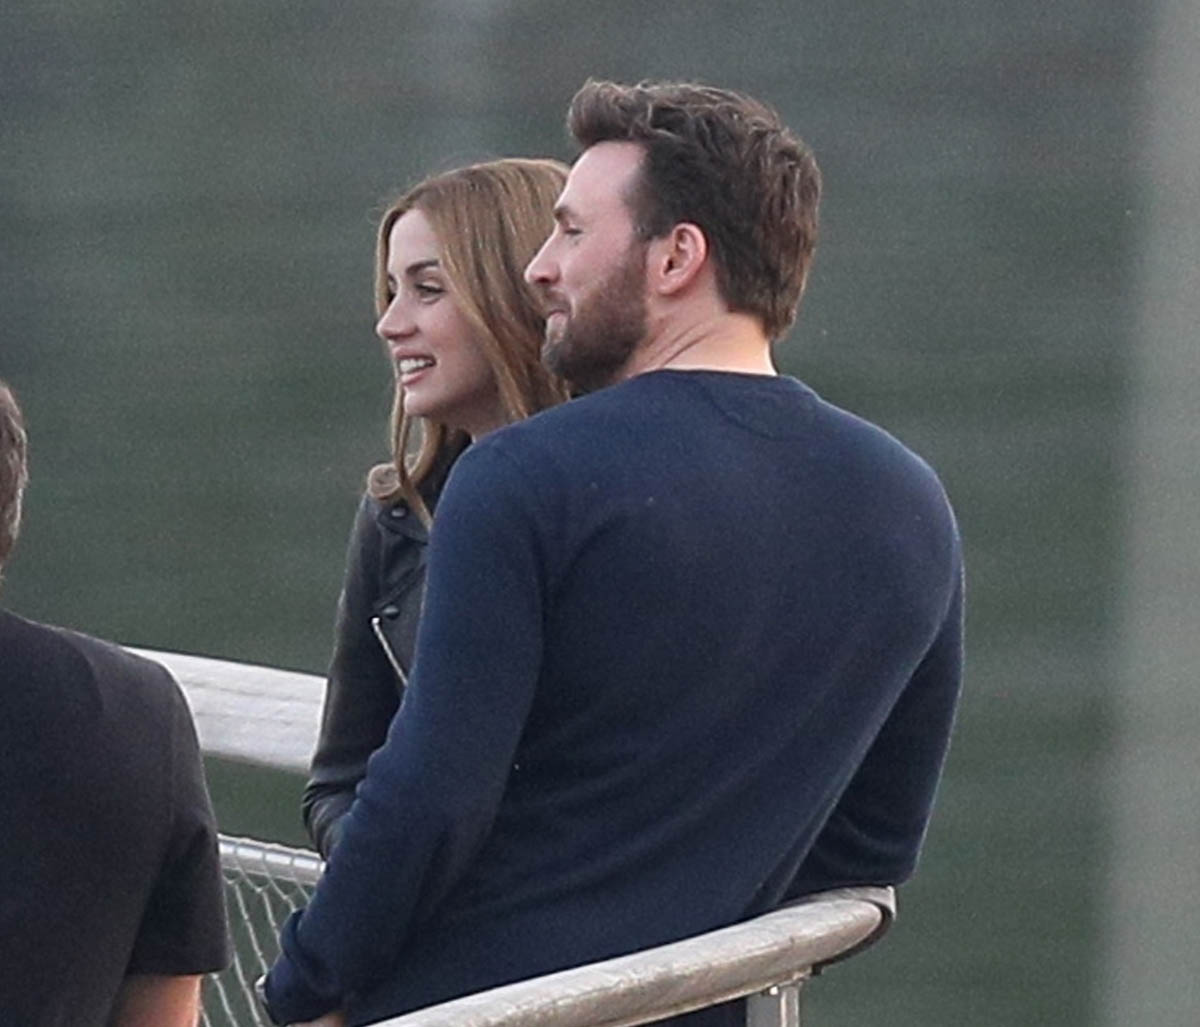 Chris Evans & Ana de Armas Film Kissing Scene for New Movie 'Ghosted' in  Washington, DC: Photo 4755439, Ana de Armas, Chris Evans, Ghosted Photos